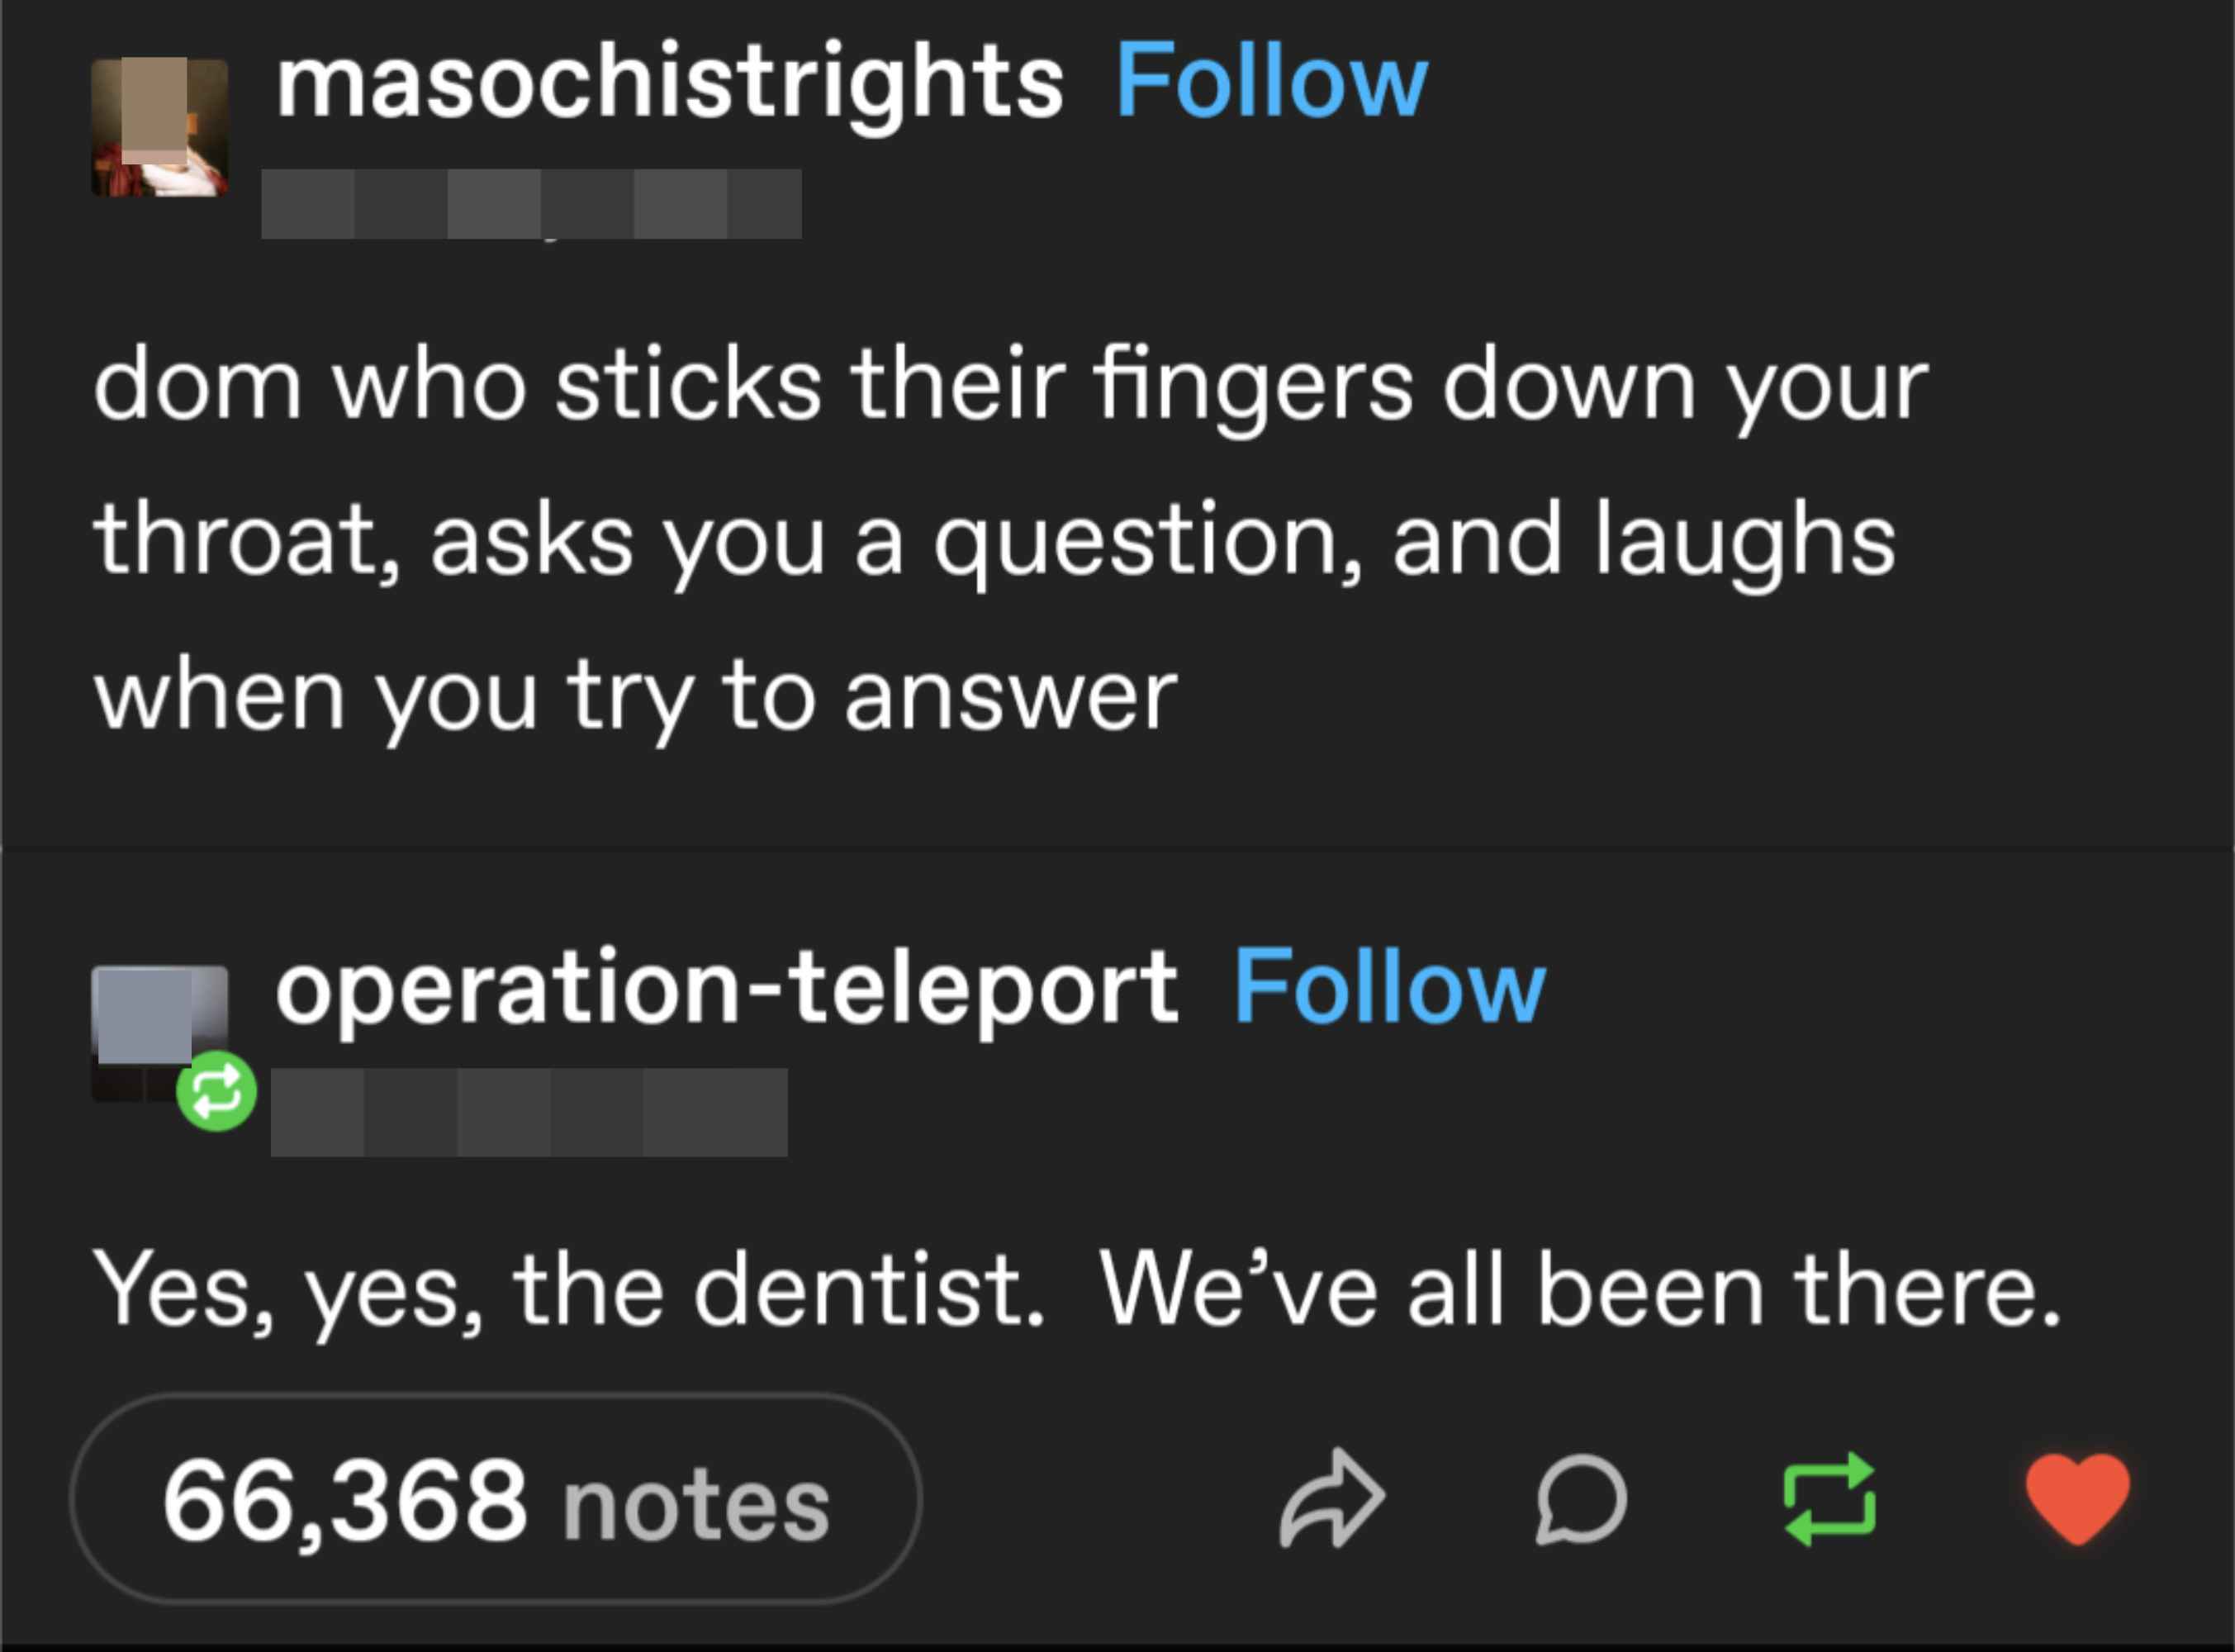 &quot;Dom who sticks their fingers down your throat, asks you a question, and laughs when you try to answer,&quot; with response&quot; Yes, yes, the dentist; we&#x27;ve all been there&quot;